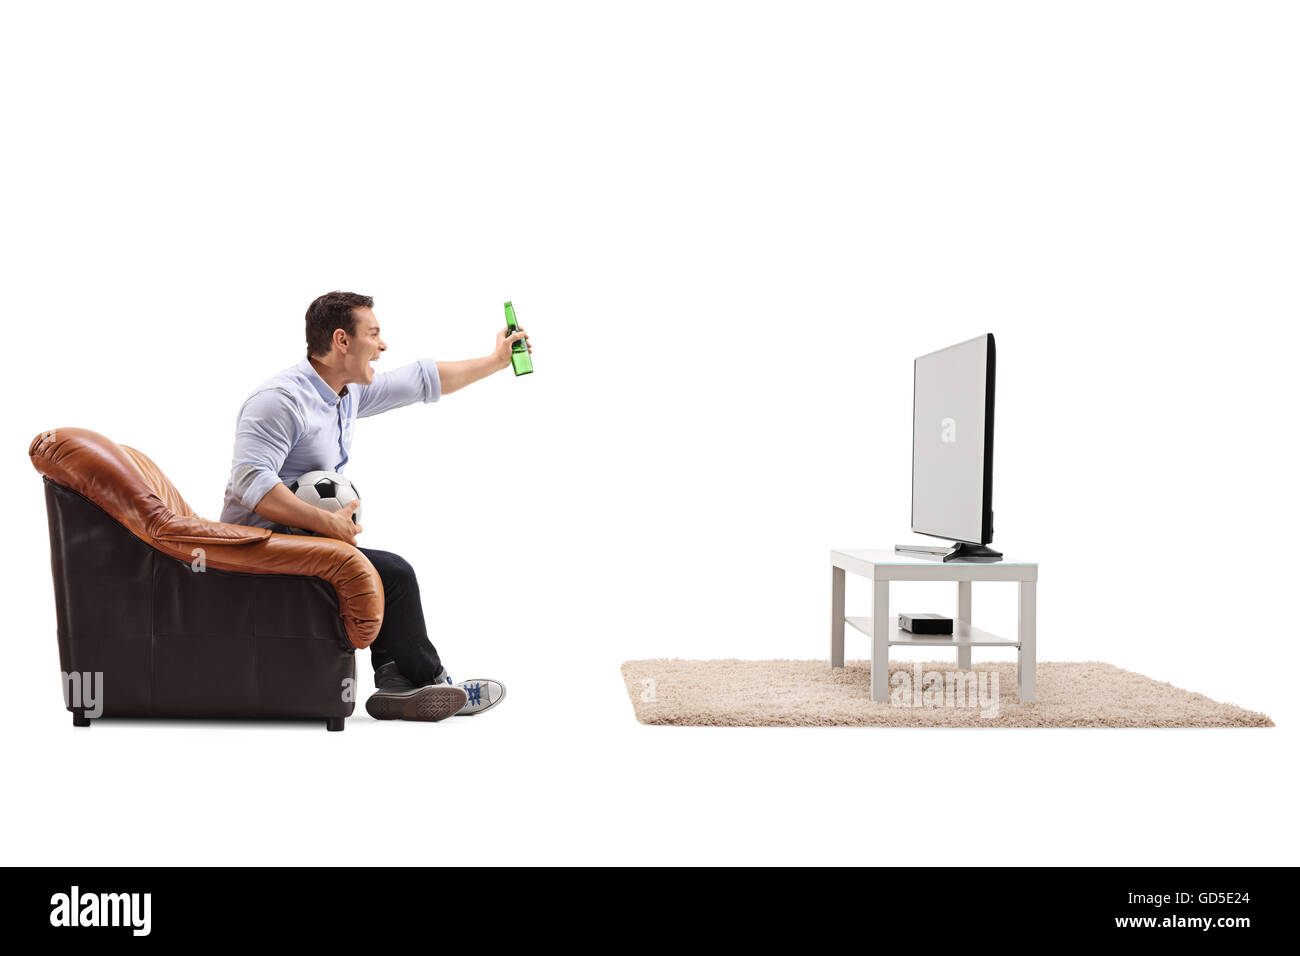 Joyful guy watching football on TV and celebrating with a beer isolated on white background Stock Photo